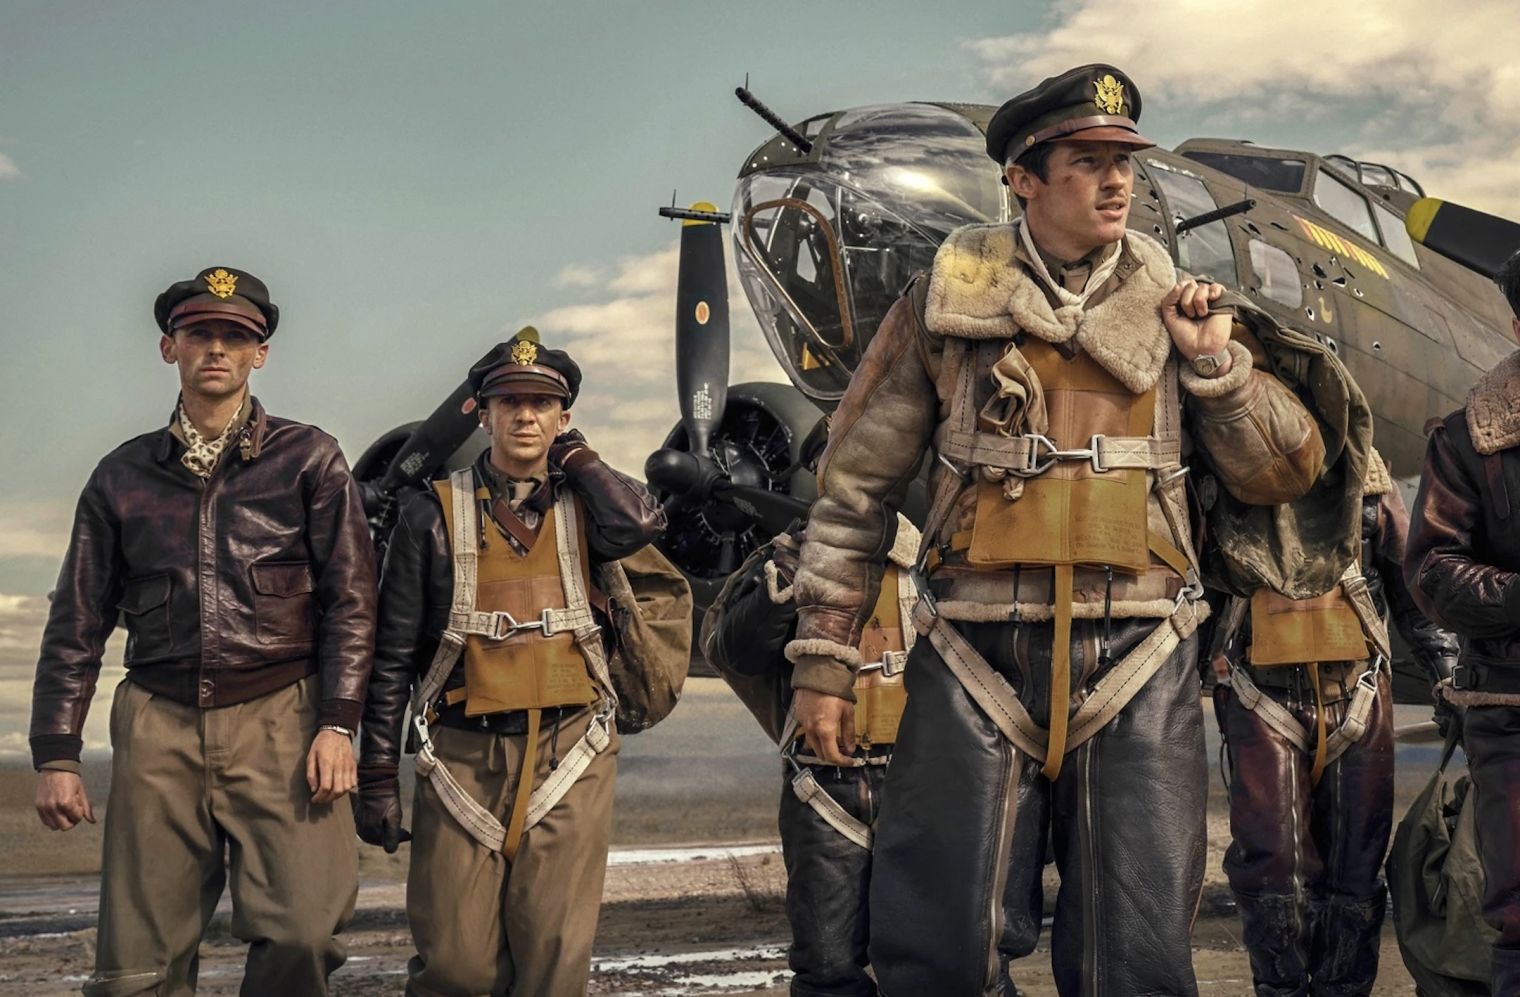 WWII drama series Masters of the Air, starring Callum Turner, is released on Apple TV+ today